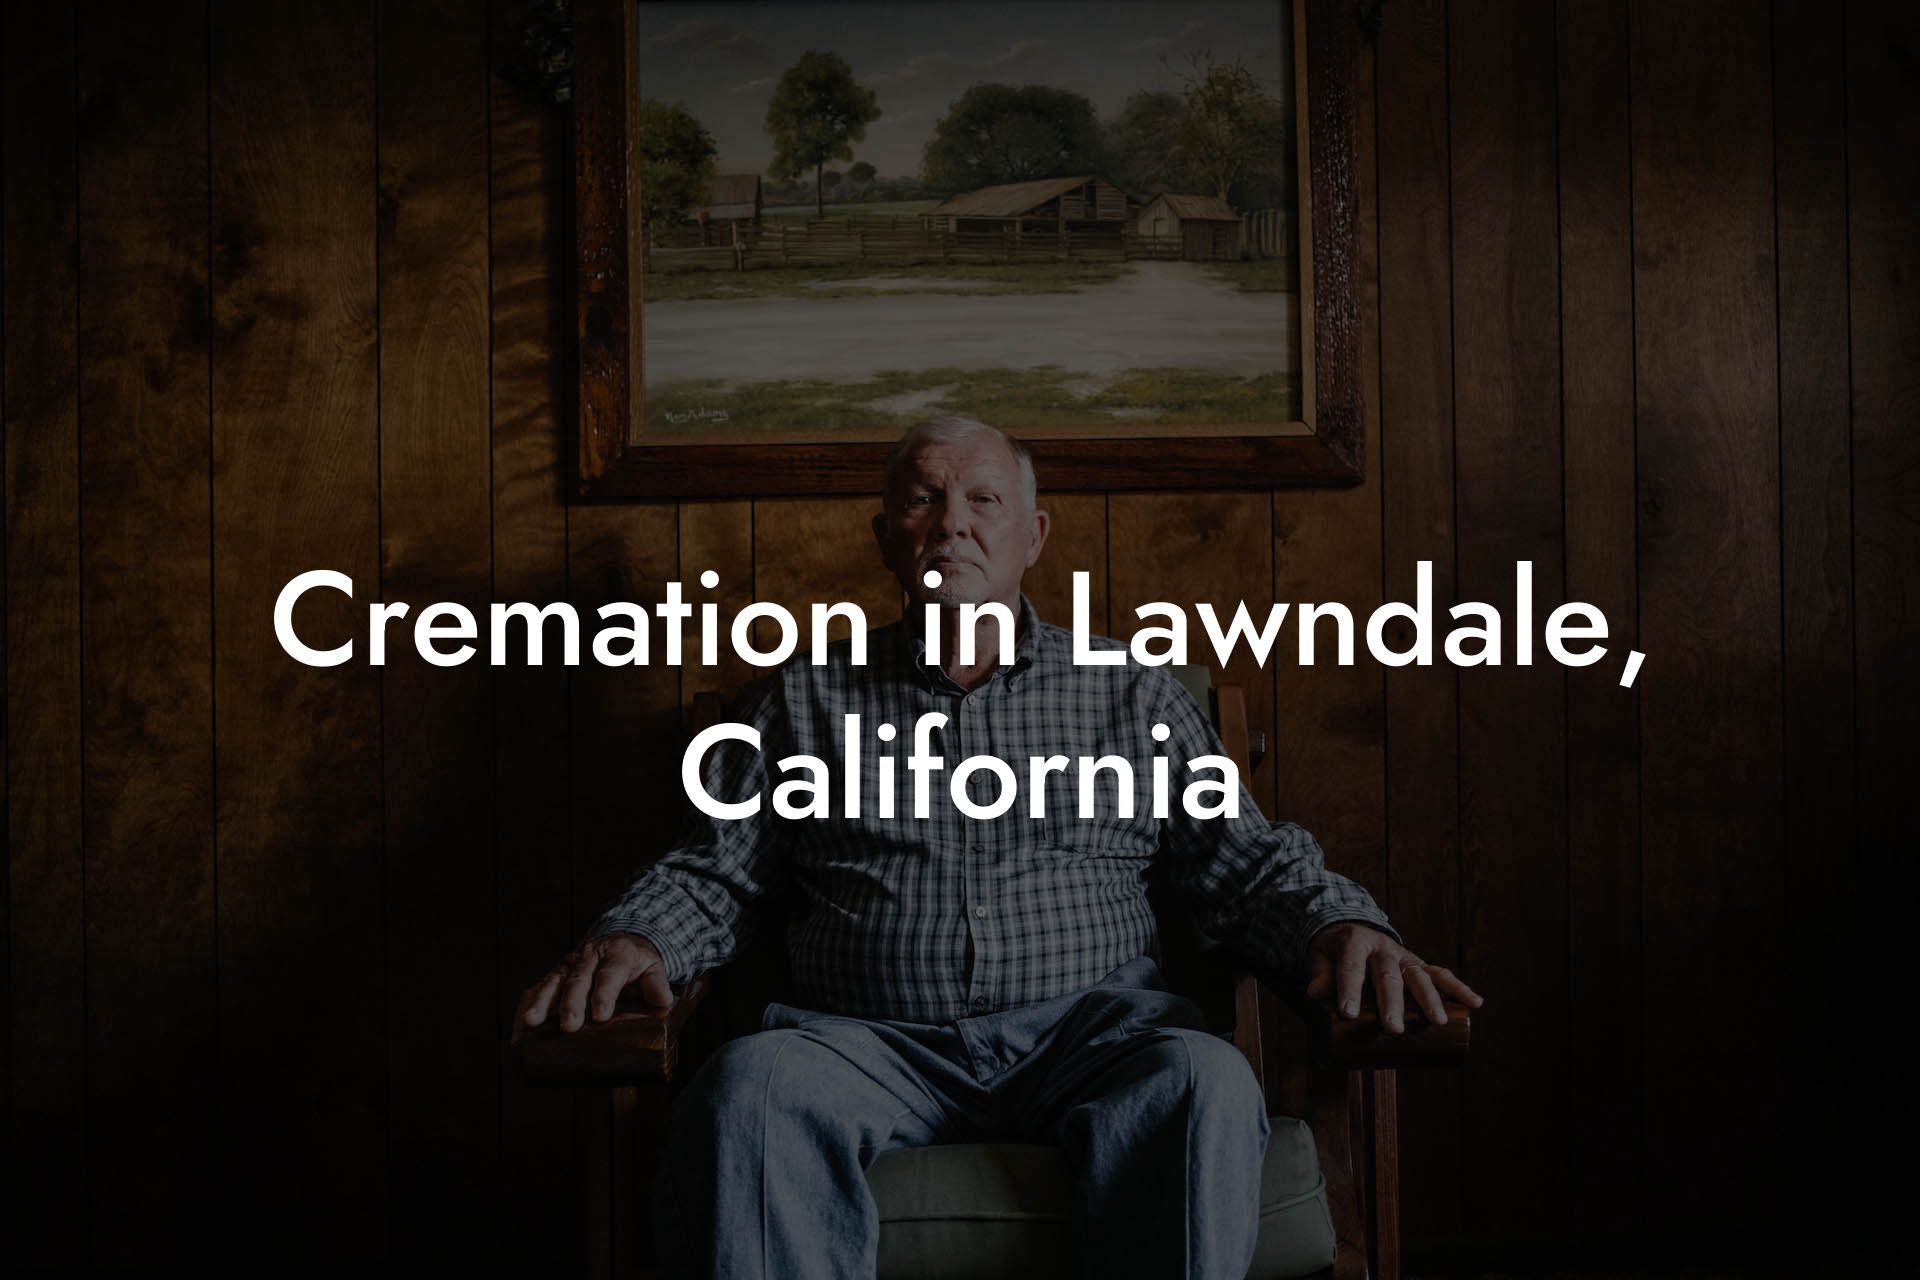 Cremation in Lawndale, California